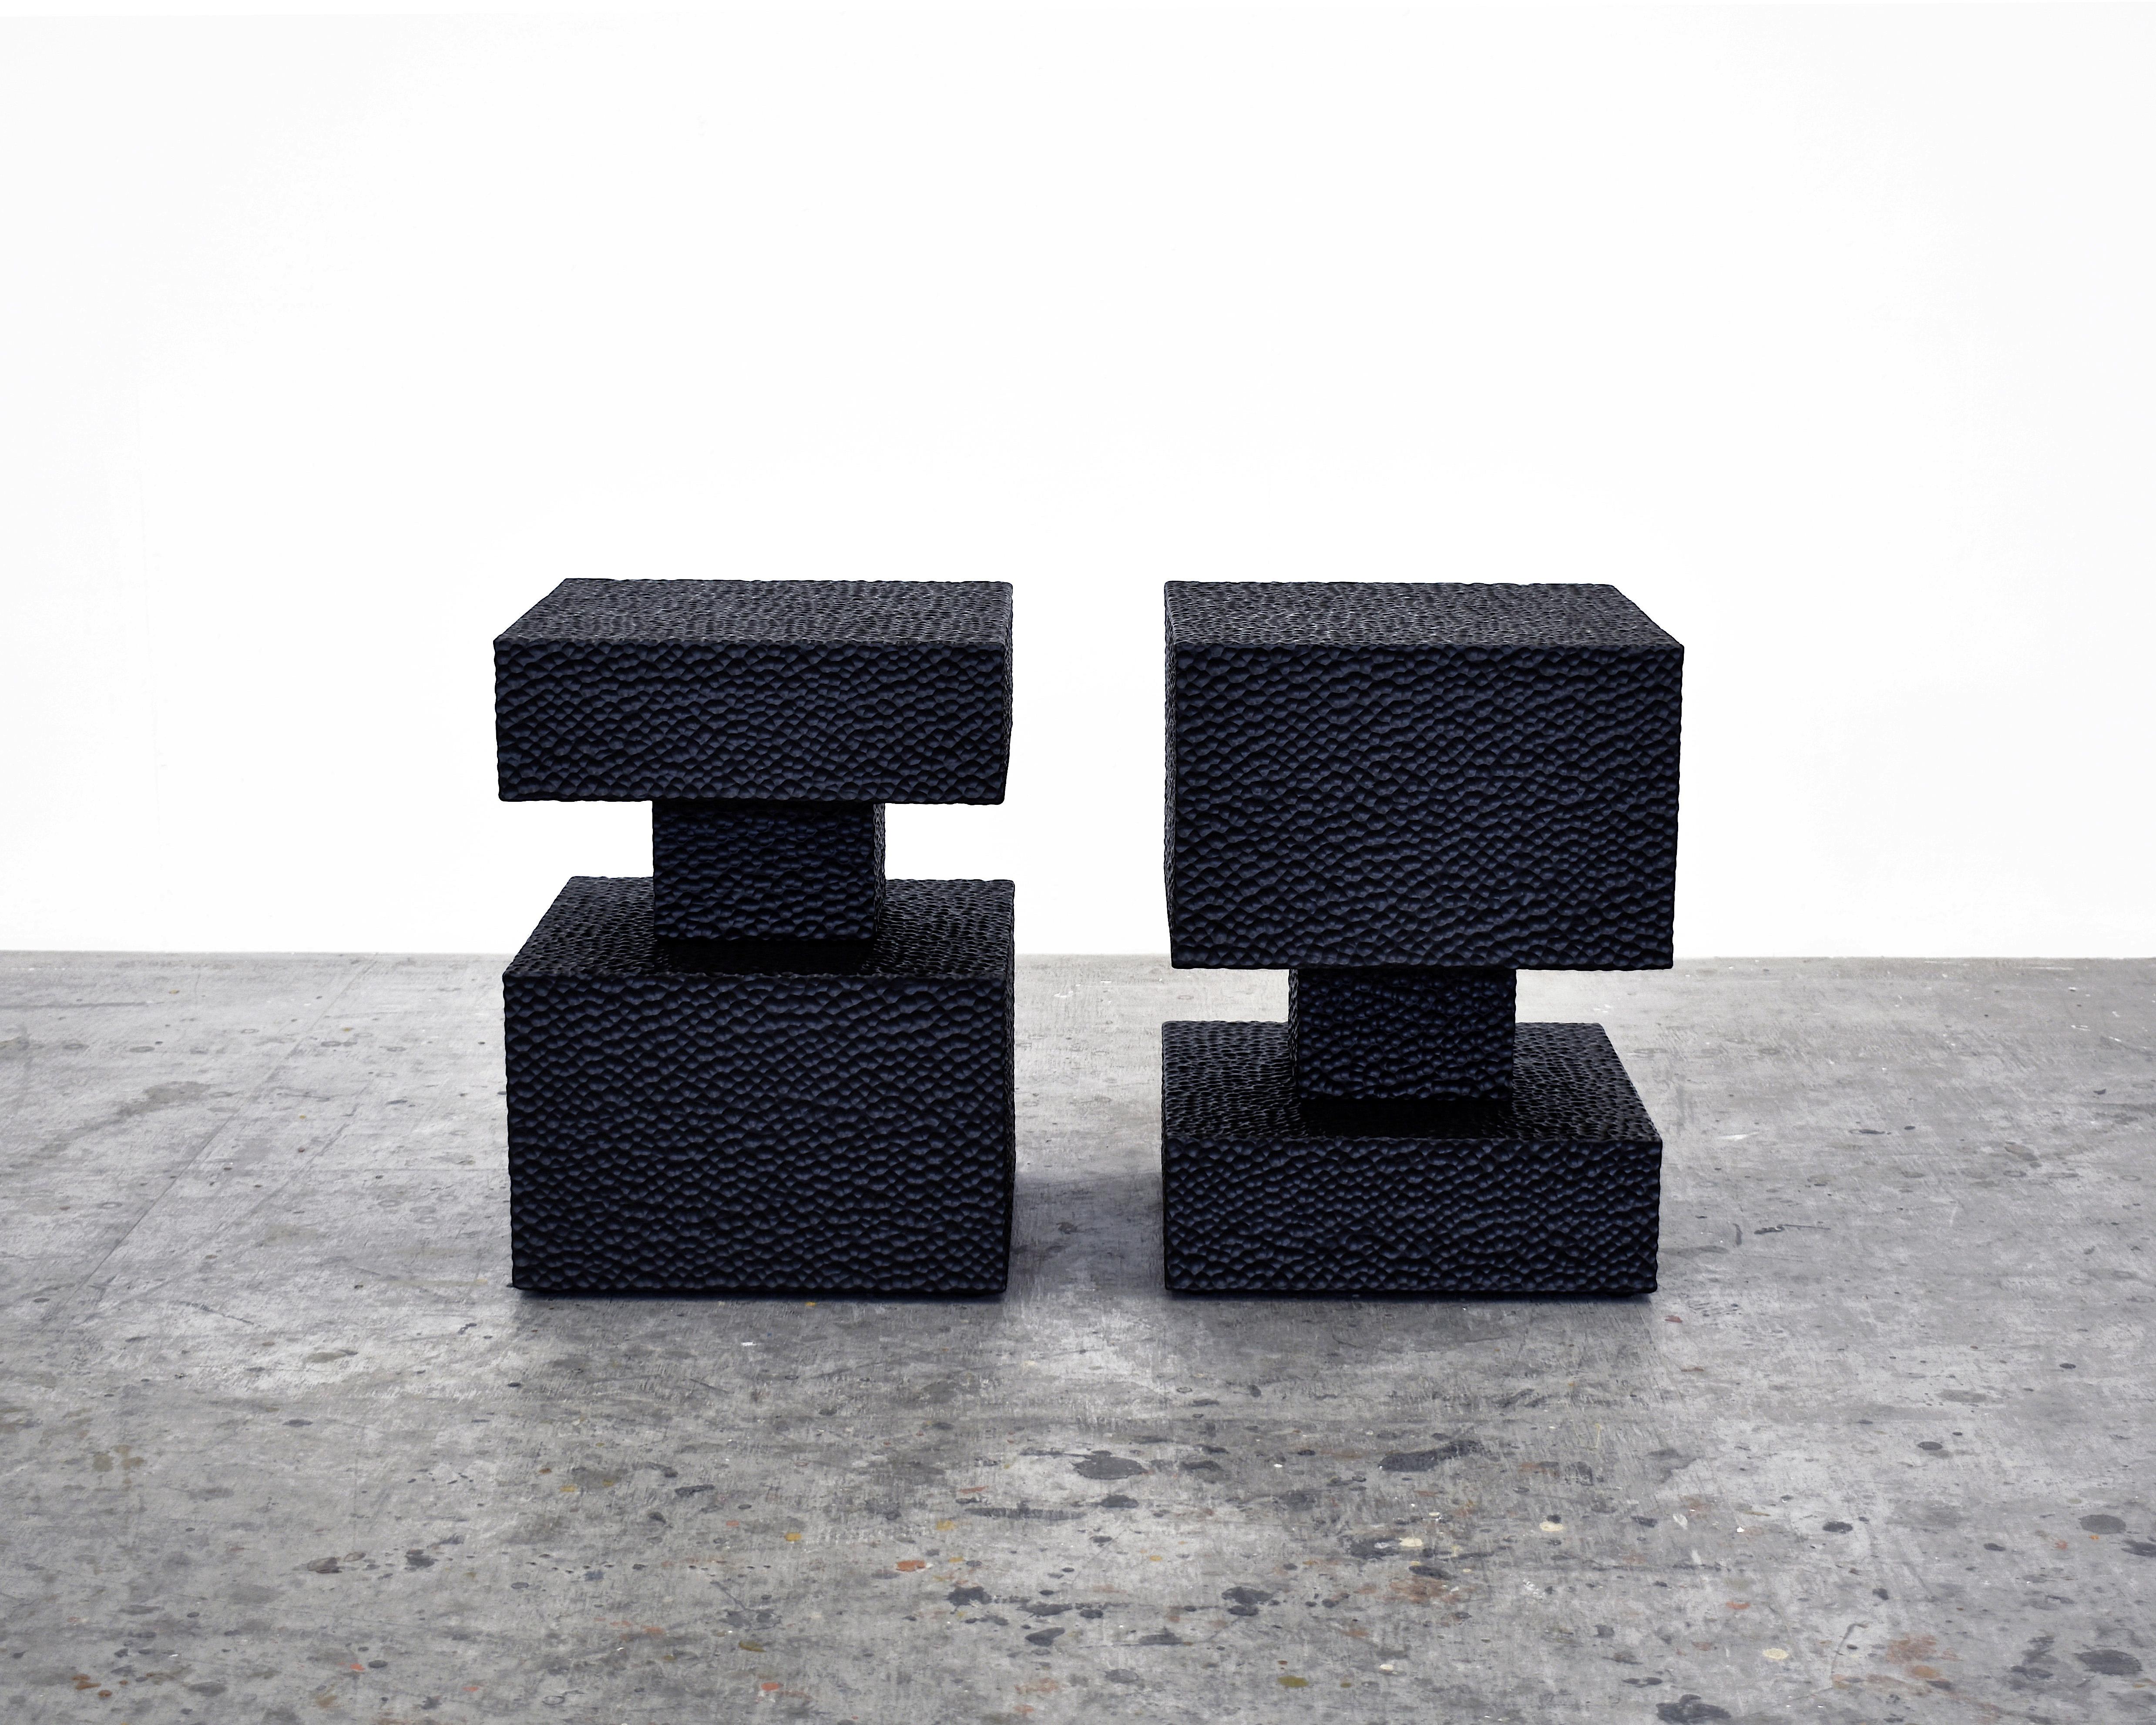 Set of 2 square revert table by John Eric Byers
Dimensions: 50.8 x diameter 40.6 cm
Materials: Carved blackened maple

All works are individually handmade to order.

John Eric Byers creates geometrically inspired pieces that are minimal,